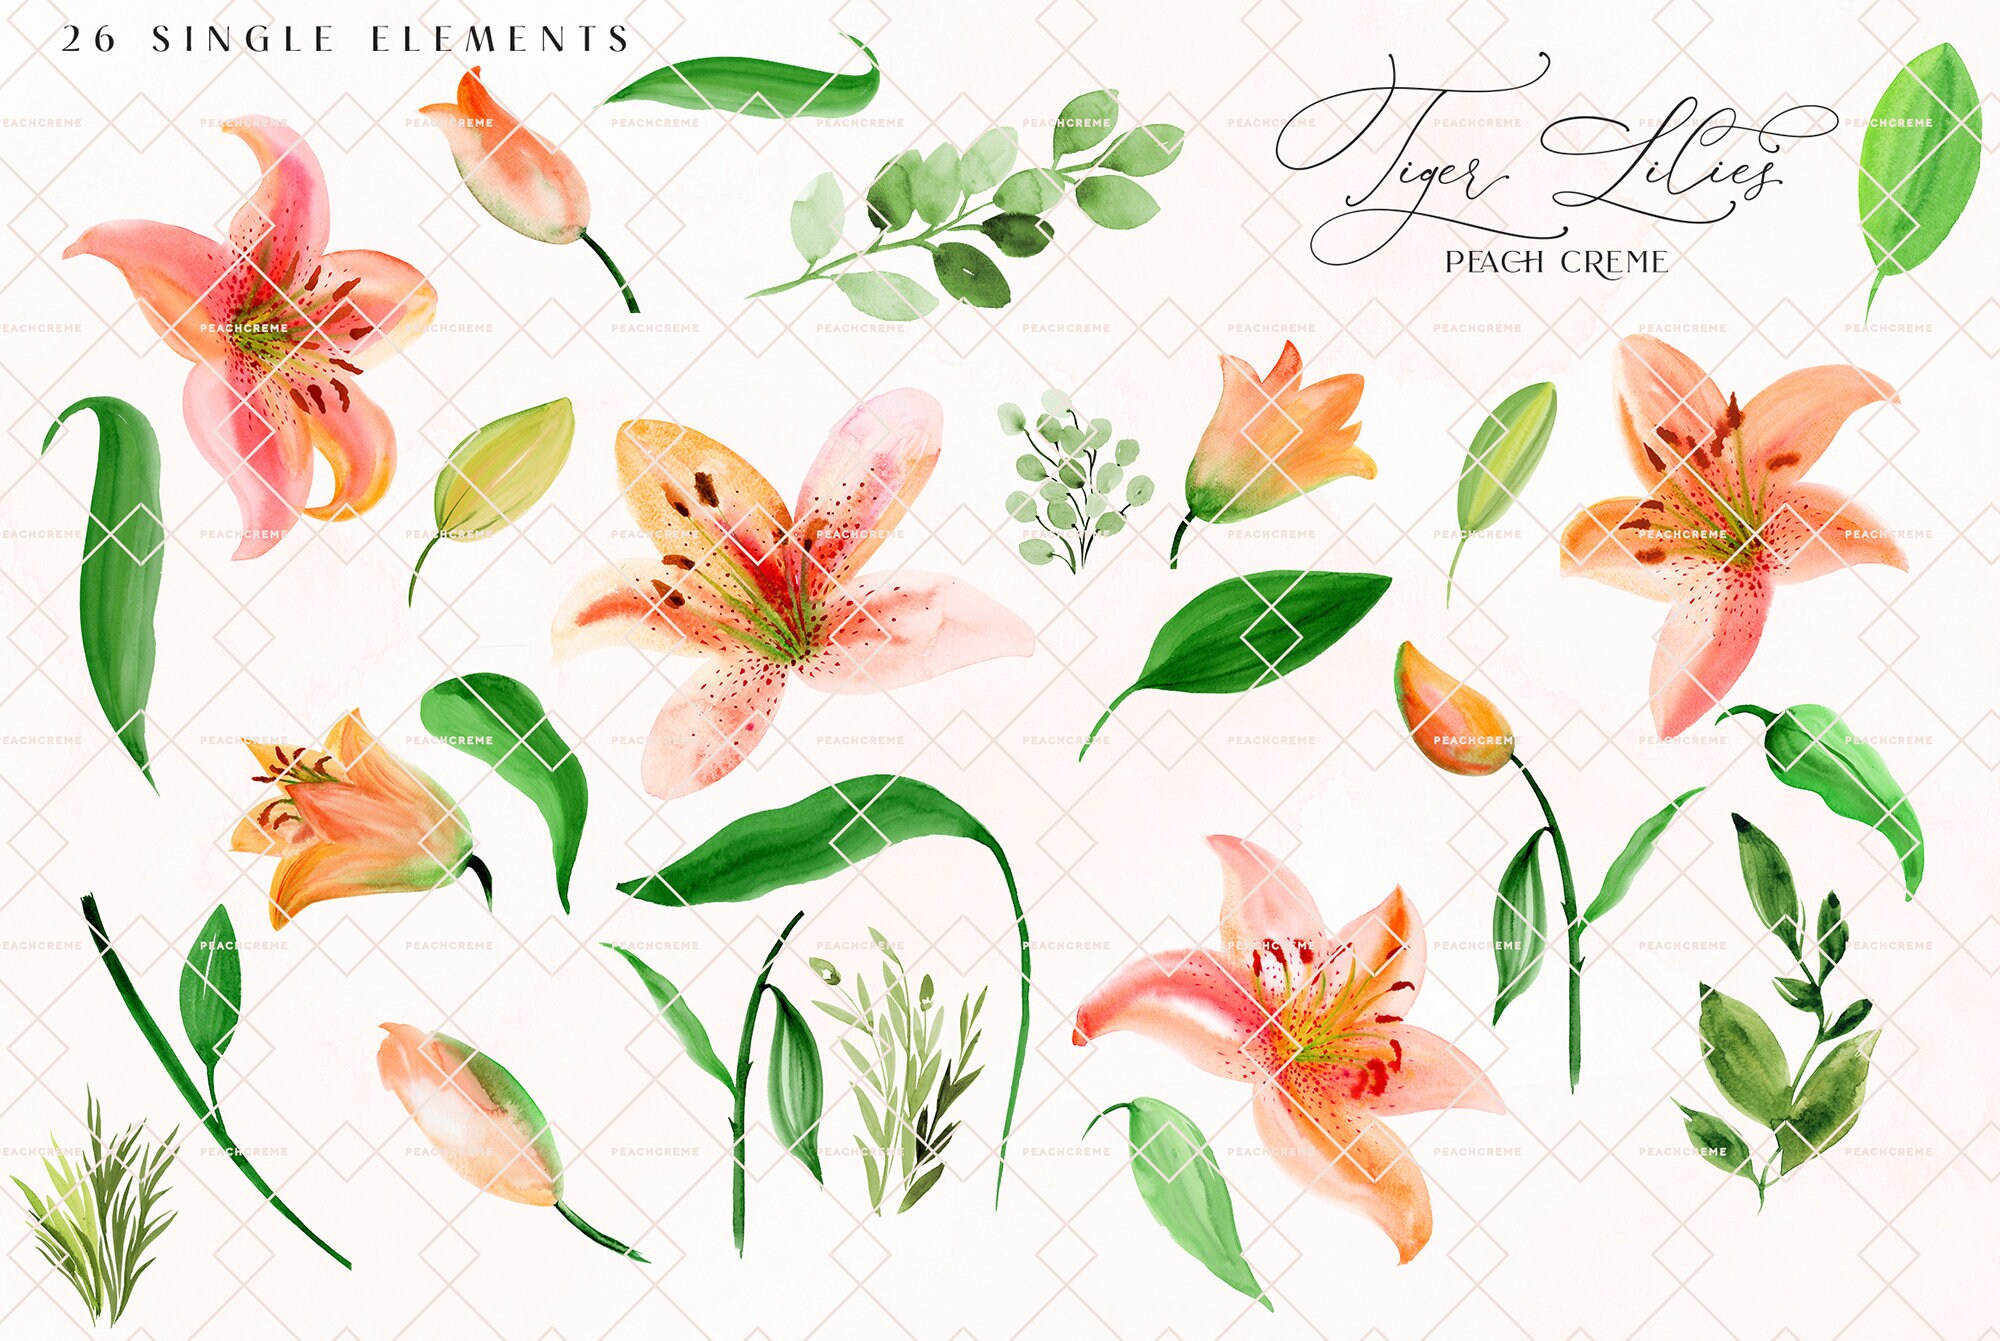 Tiger Lilies Watercolor Flower Clip Art Collection Wedding | Etsy